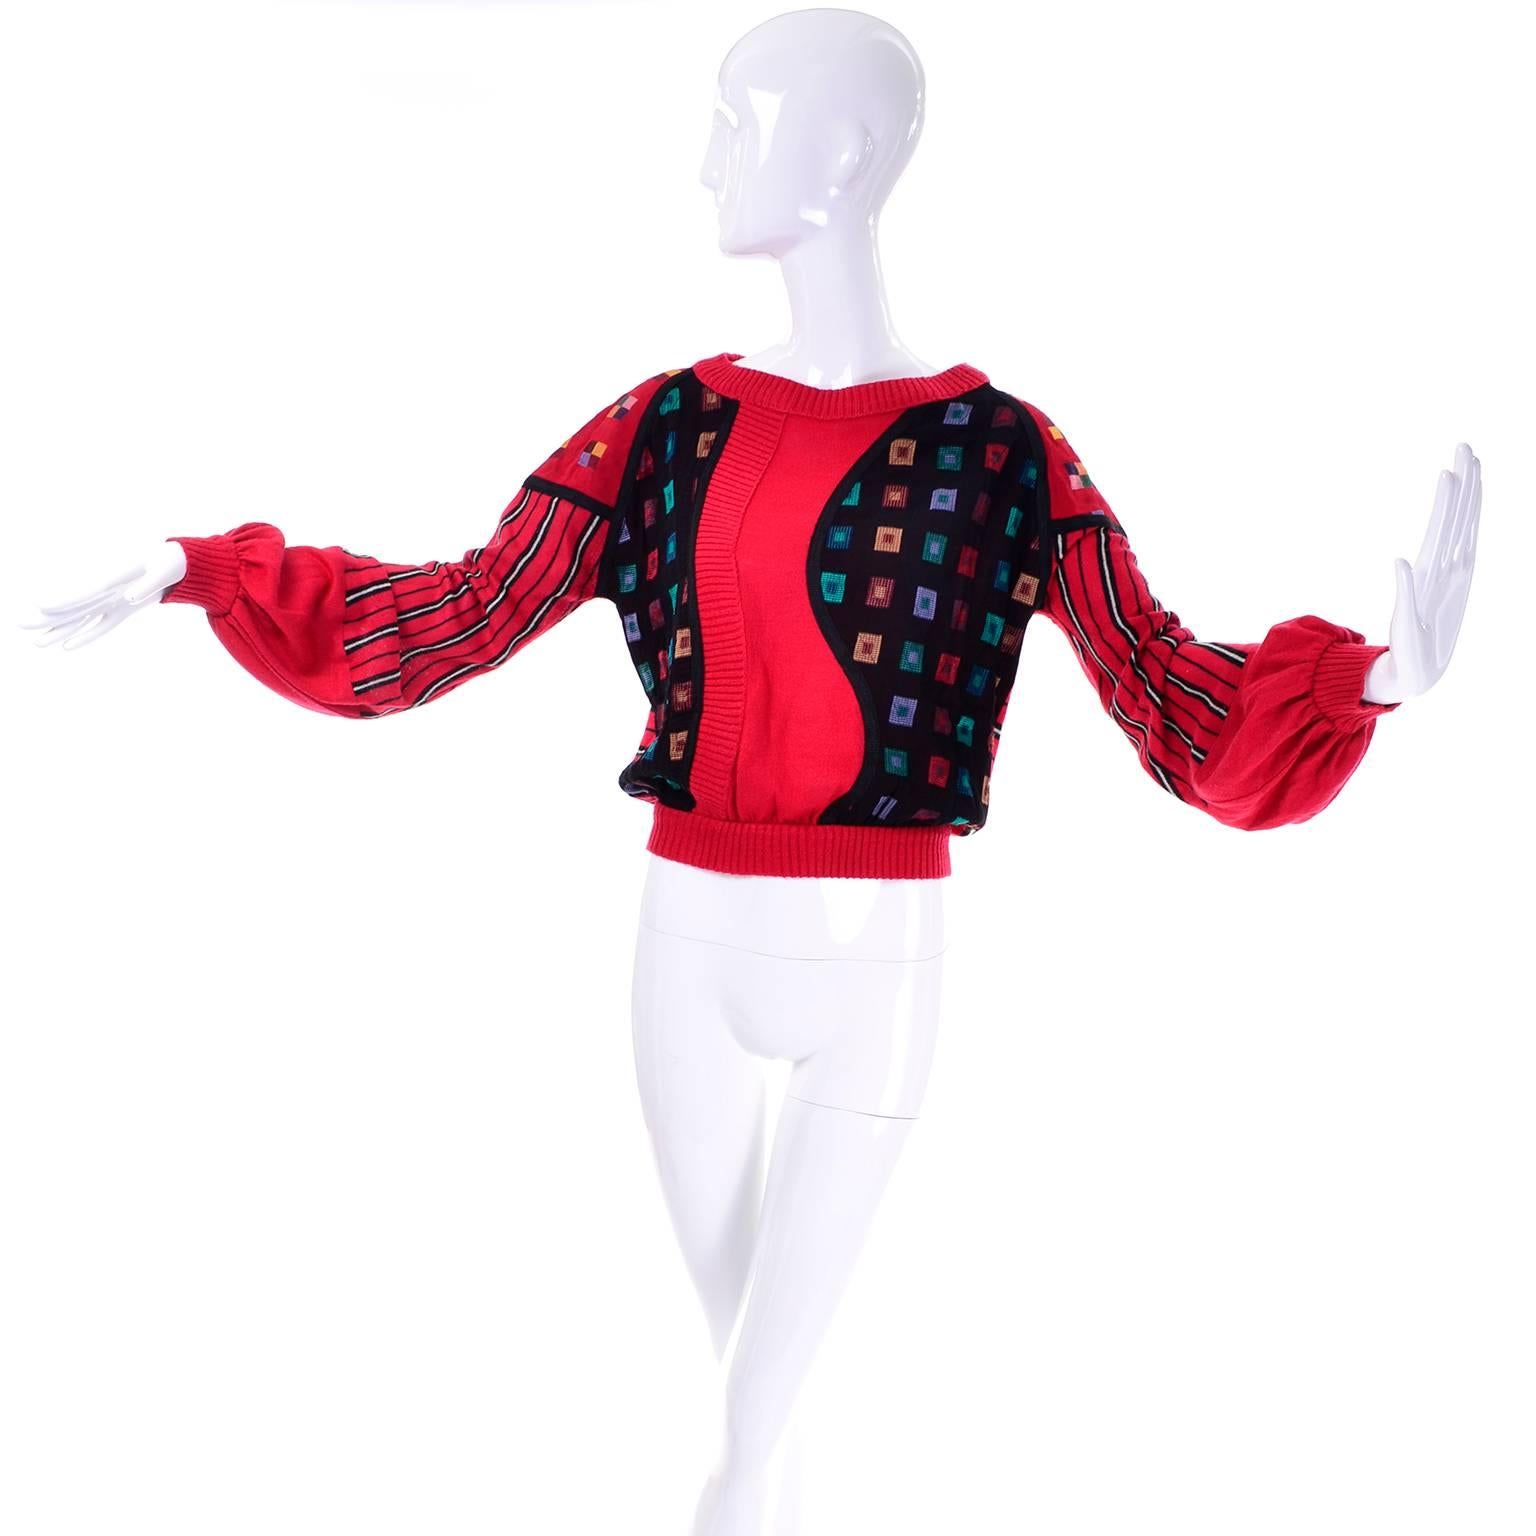 This very unique multi fabric and mixed pattern vintage sweater was designed by Koos Van Den Akker in the 1980's.  This fabulous sweater has red silk or possibly silk/wool blend knit fabric, as well as silk patterned fabric in red and black.  The